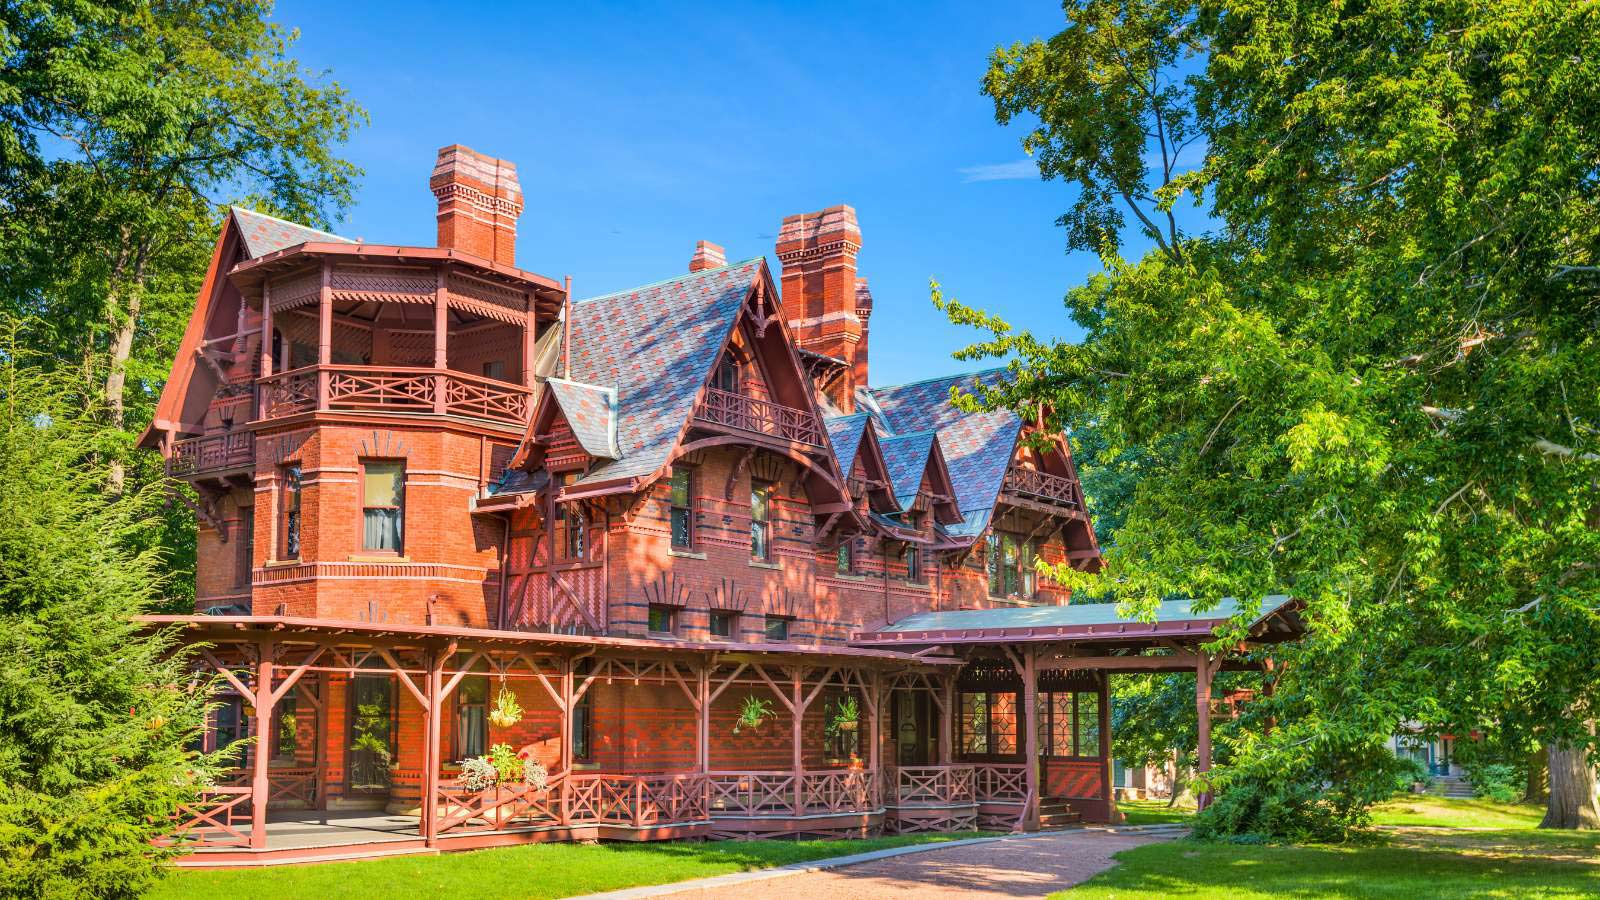 <p>Mark Twain’s Boyhood Home and Museum is the home of Samuel Clemens, better known as the author Mark Twain. He lived in the house from 1844 to 1853, and the museum offers a glimpse into his life and the inspiration for his famous works.</p>